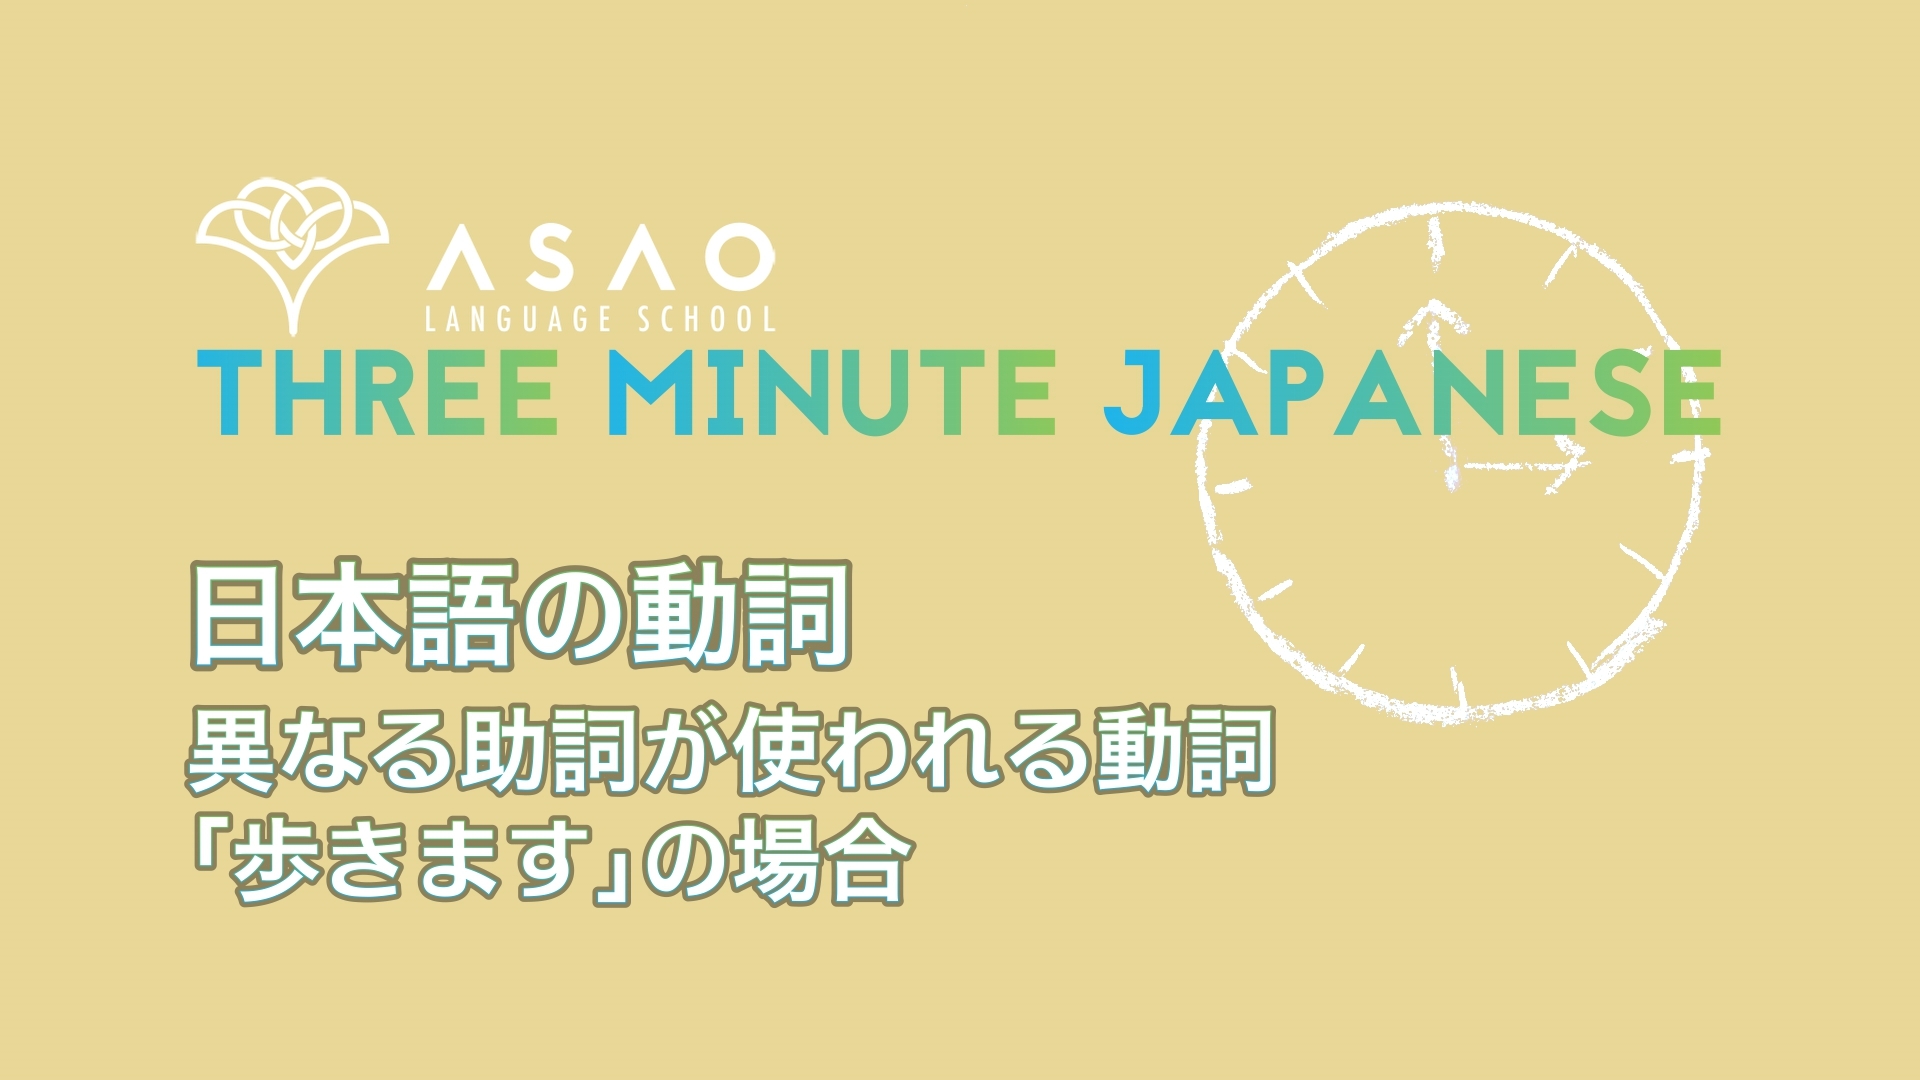 Learn Japanese - Japanese in 3 minutes - Part 9 - Edited